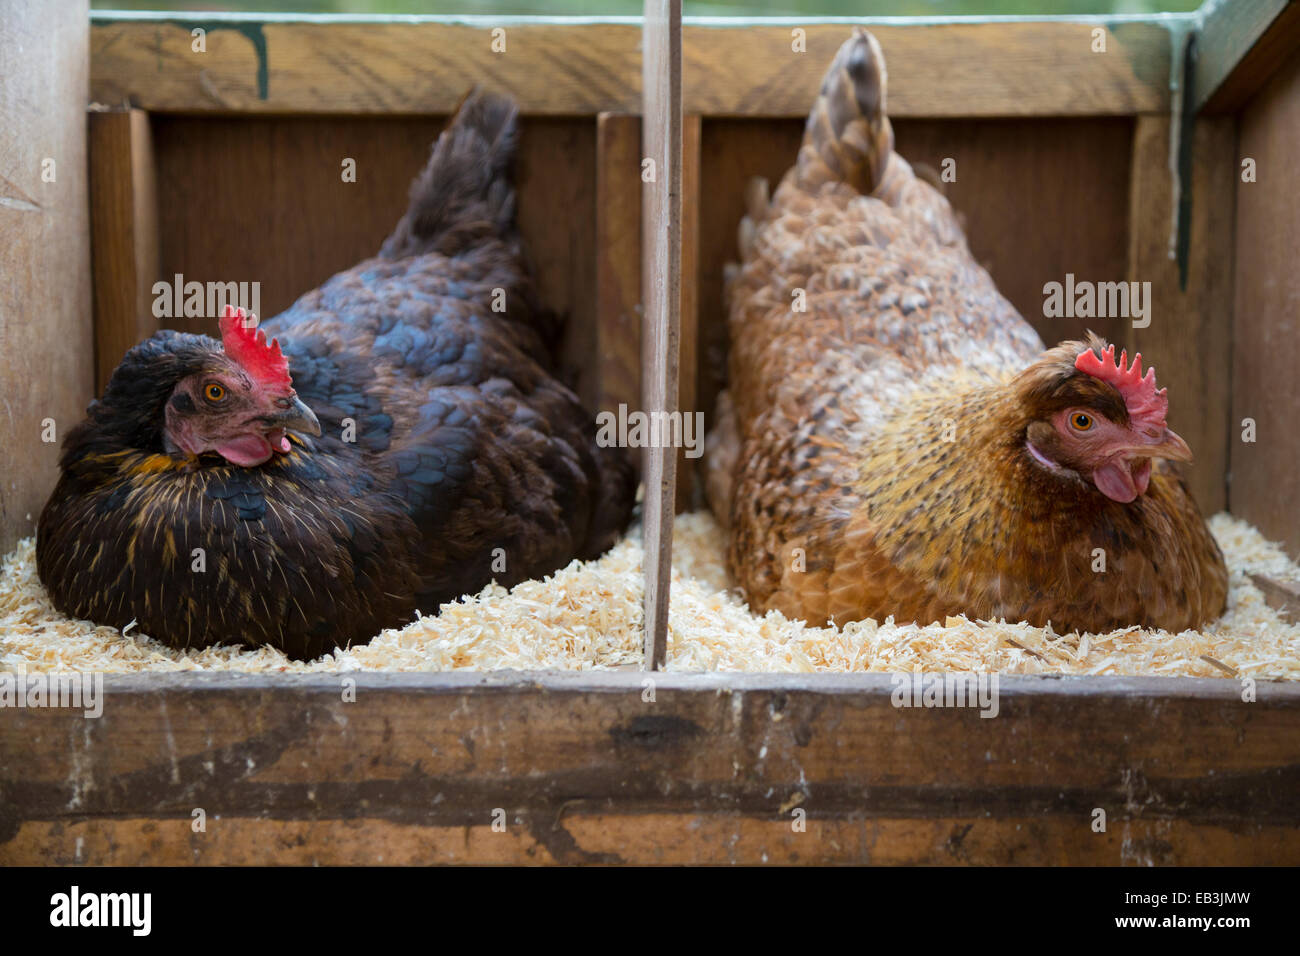 Two free range hens sitting on eggs in the hen house. Stock Photo